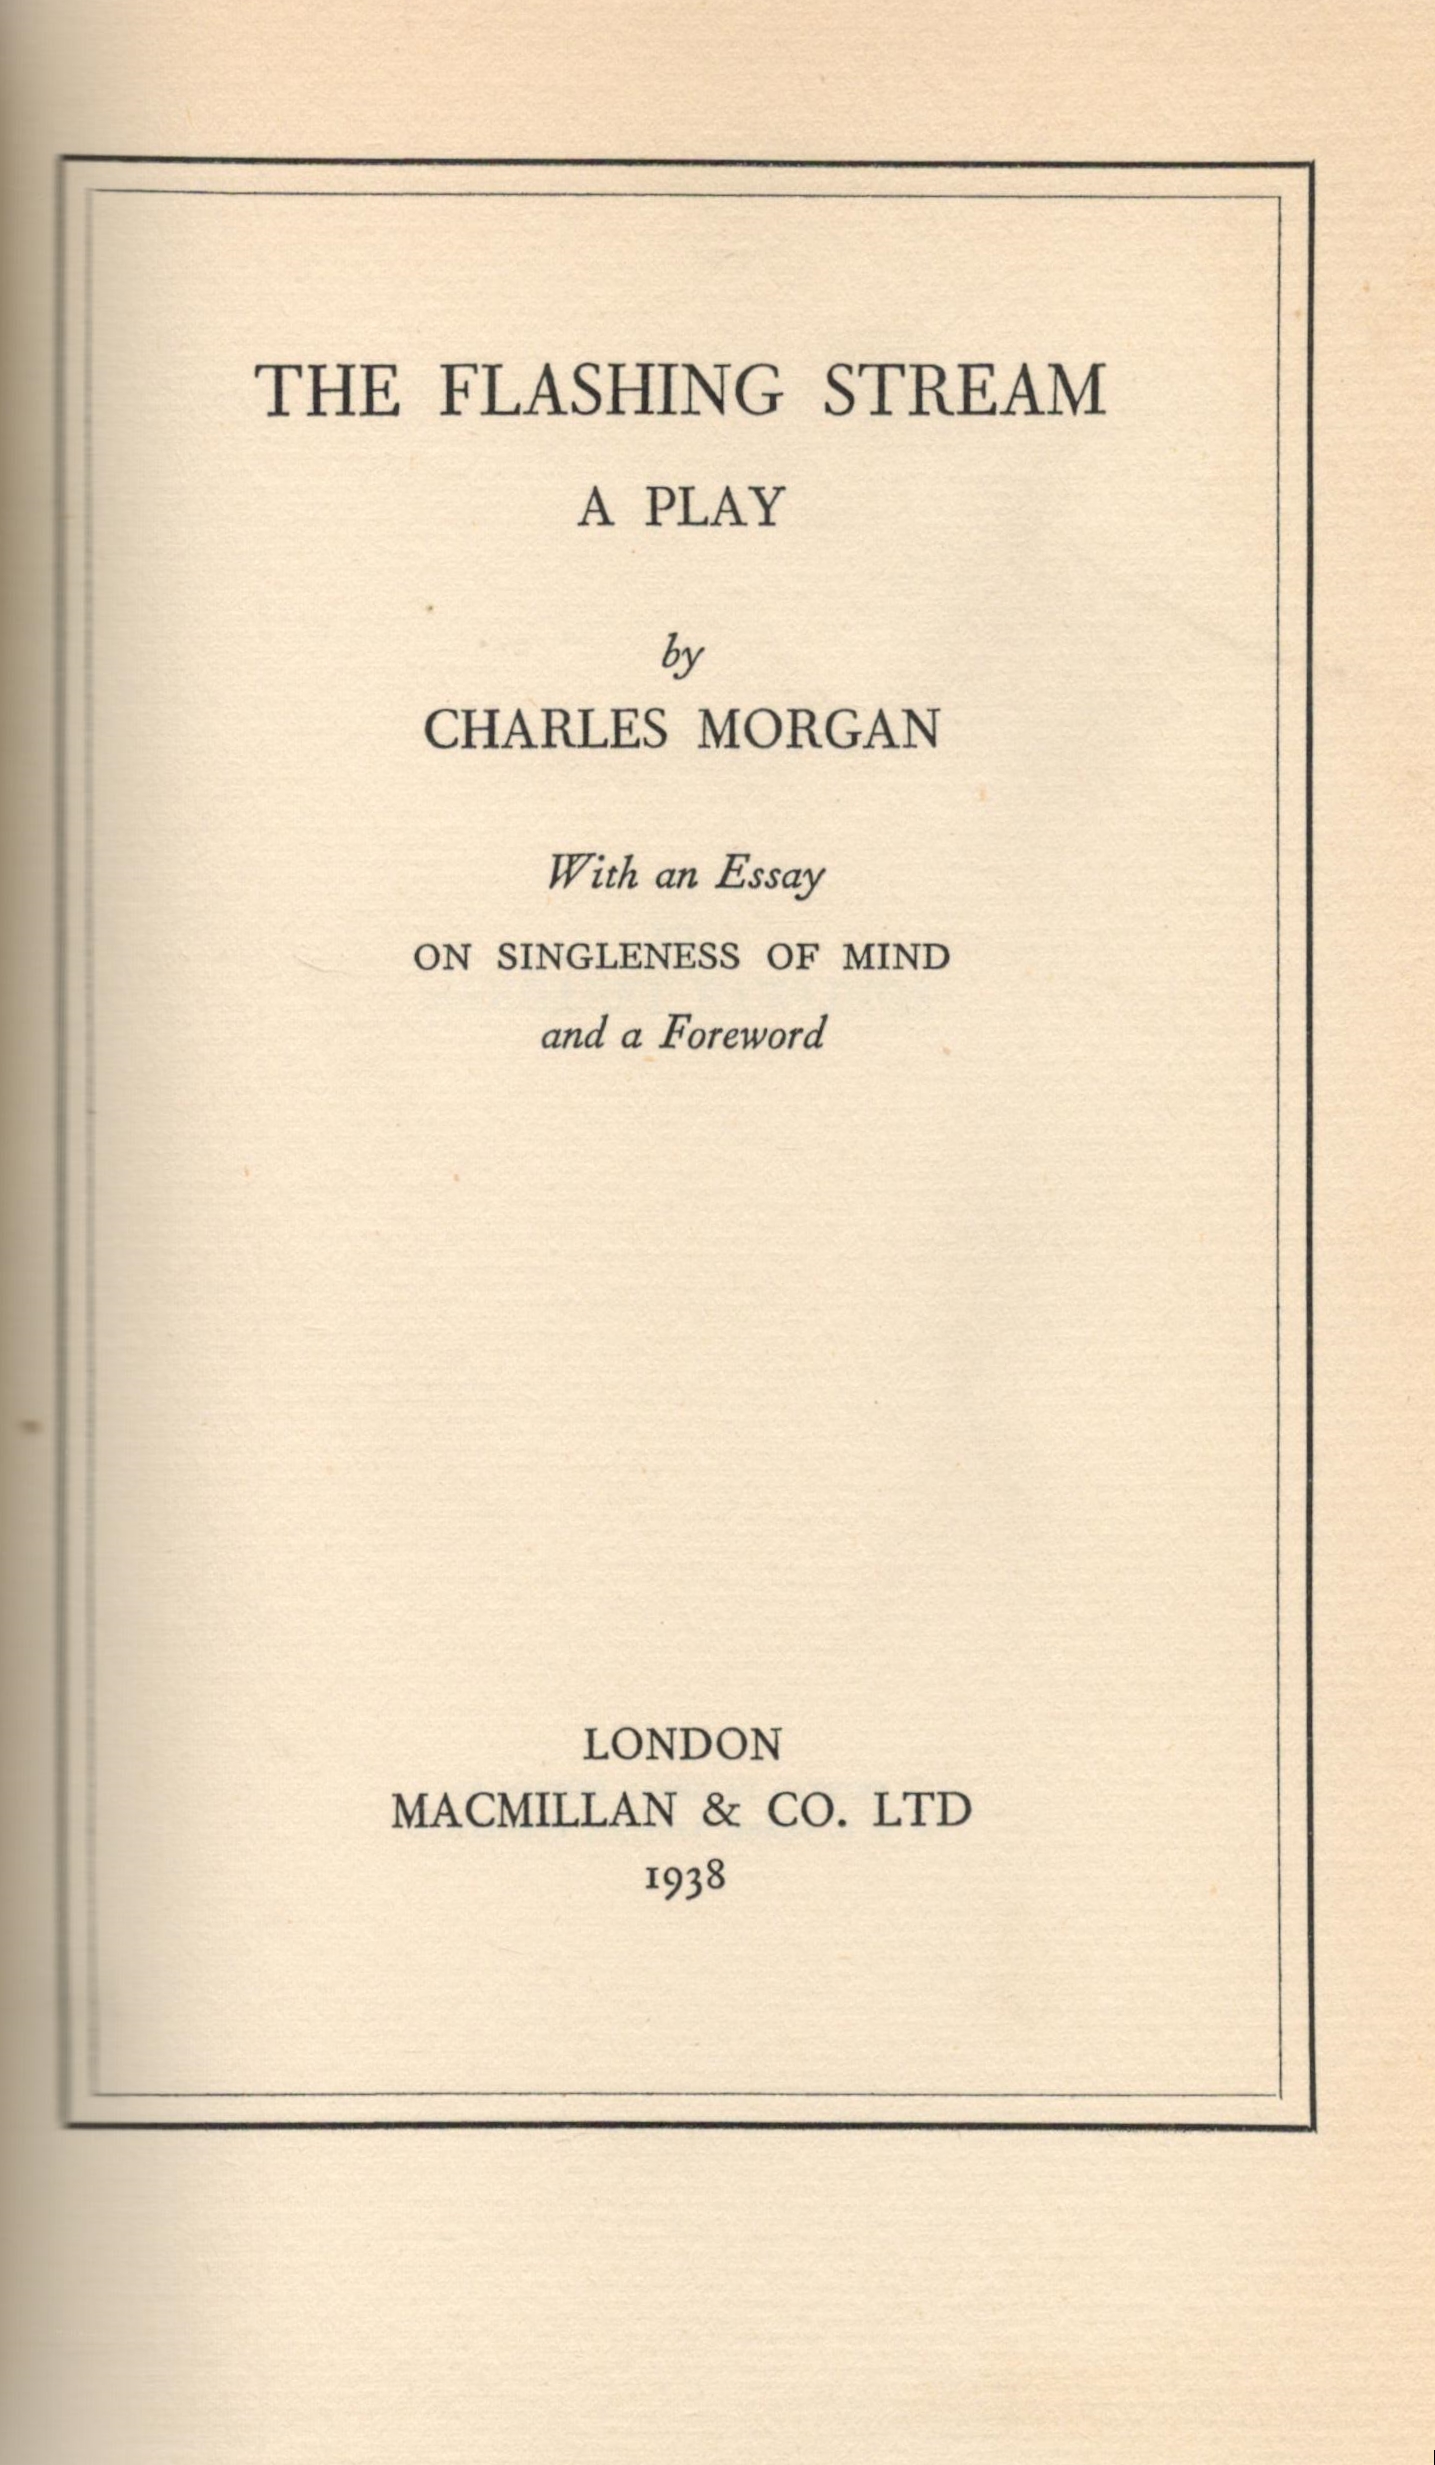 Signed Book Charles Morgan The Flashing Stream Hardback Book 1938 First Edition Signed Book - Image 3 of 3